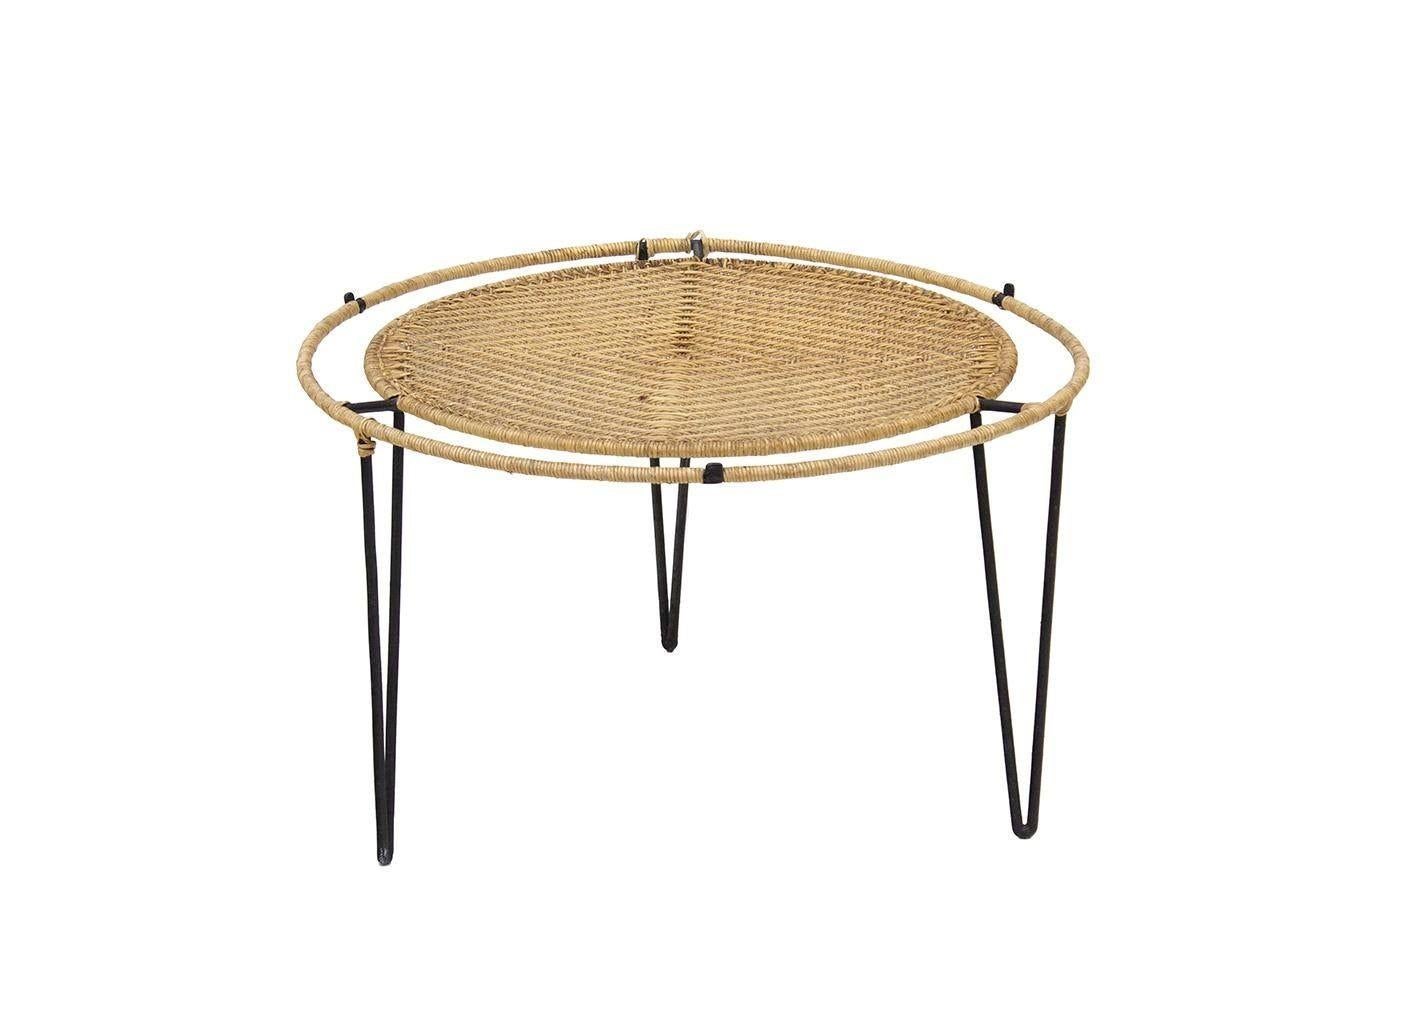 USA, 1950s
Round, smaller scale iron and raffia coffee table. Unknown designer- in the style of pieces by Van Keppel and Green or Luther Conover. This has a few tabs to the iron frame that could hold a glass top in place if desired. Smaller in